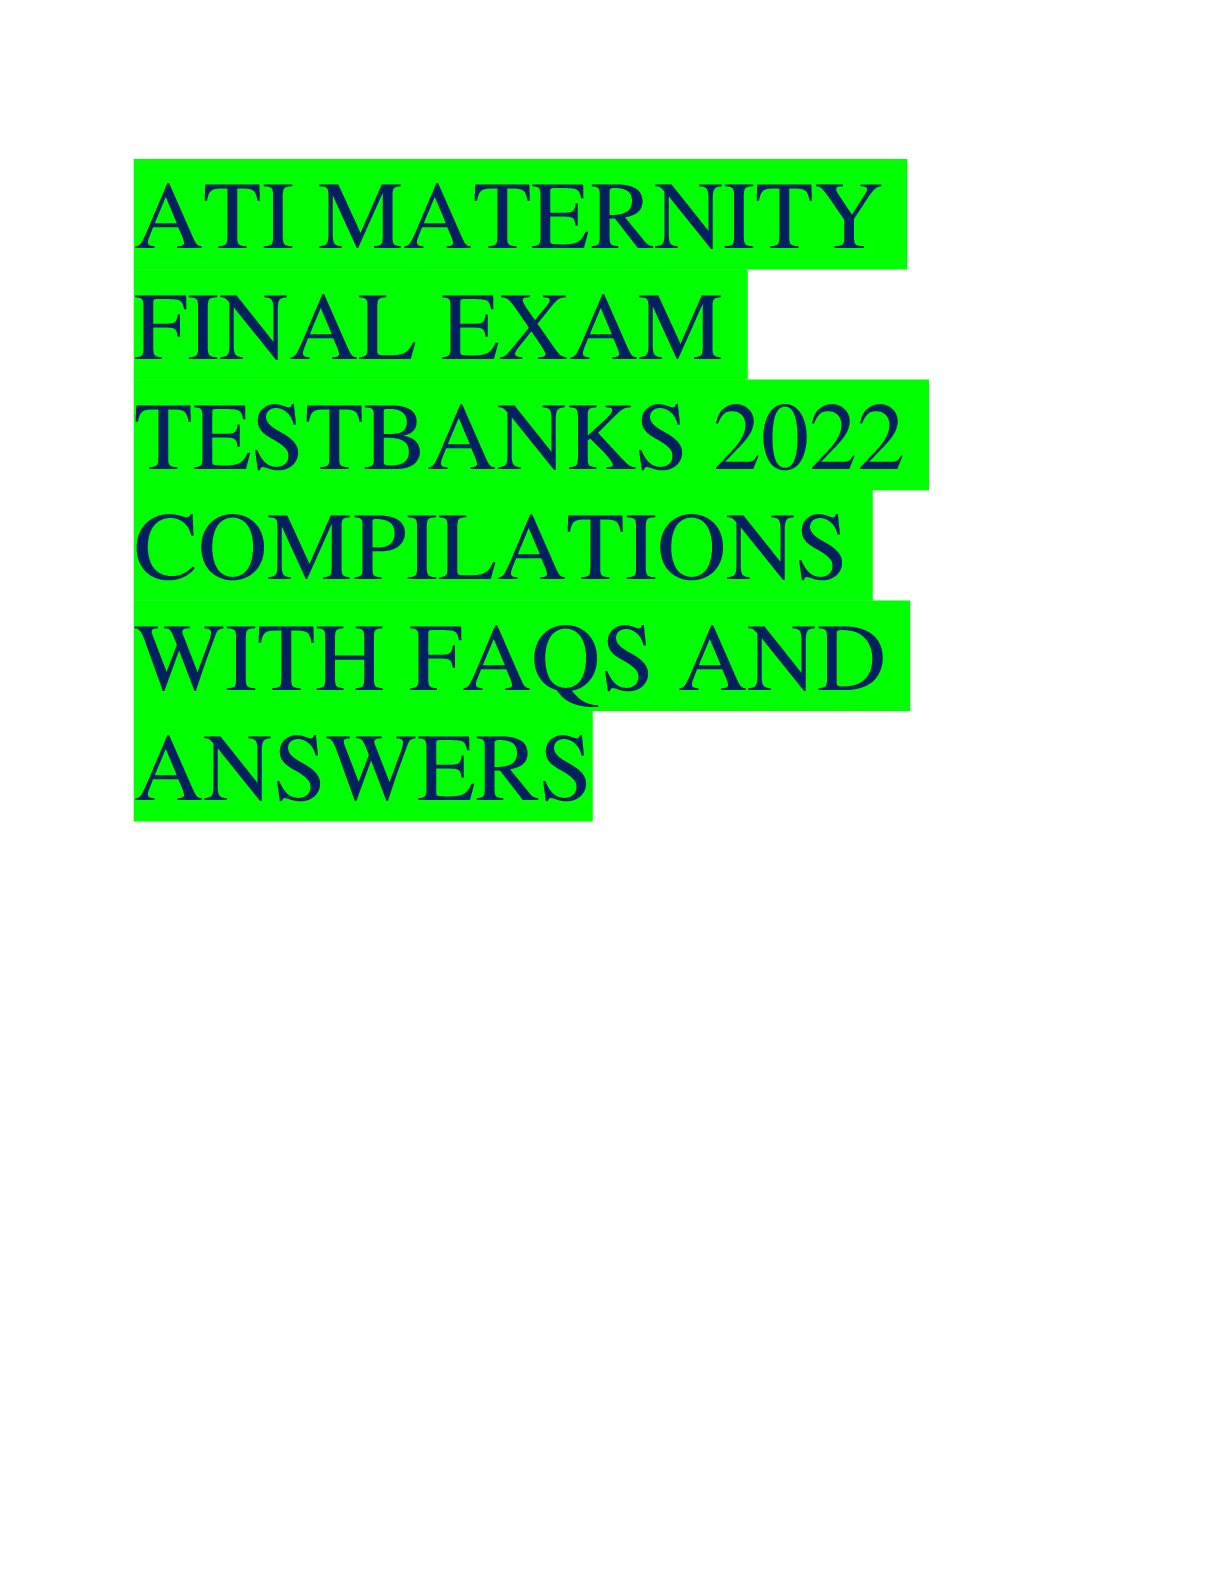 ATI MATERNITY FINAL EXAM TESTBANKS 2022 COMPILATIONS WITH FAQS AND